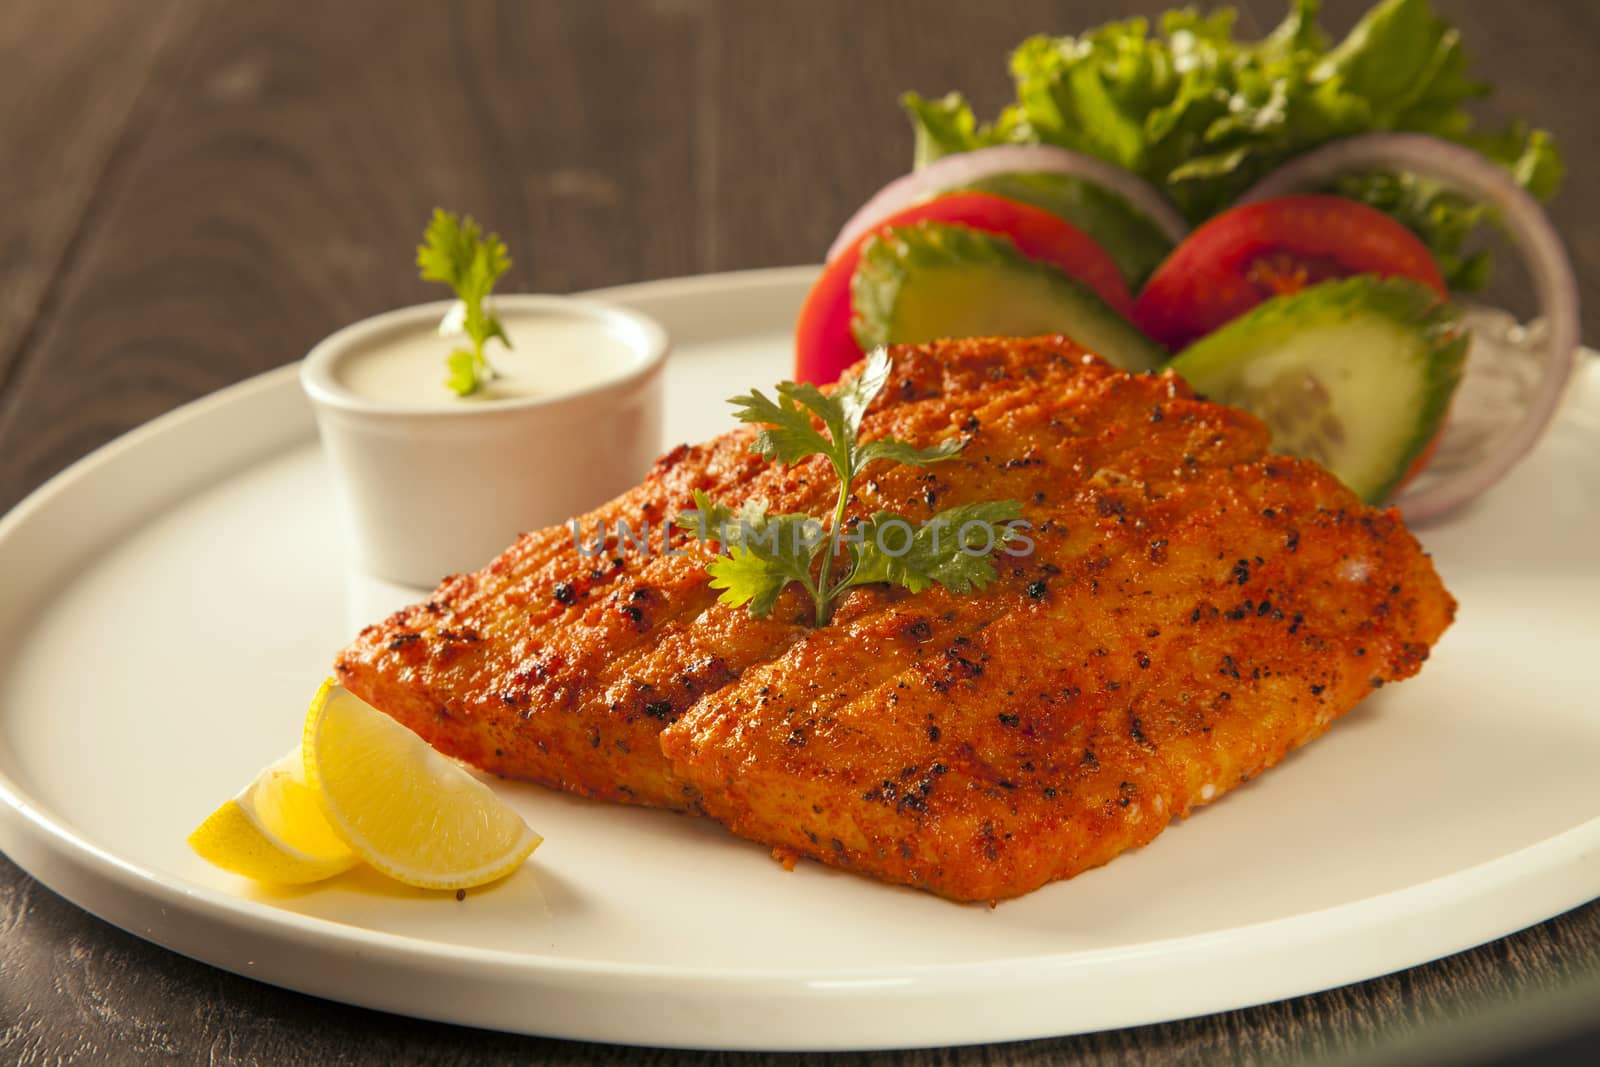 Grilled fish tikka served on a plate with salad and tarter sauce by haiderazim